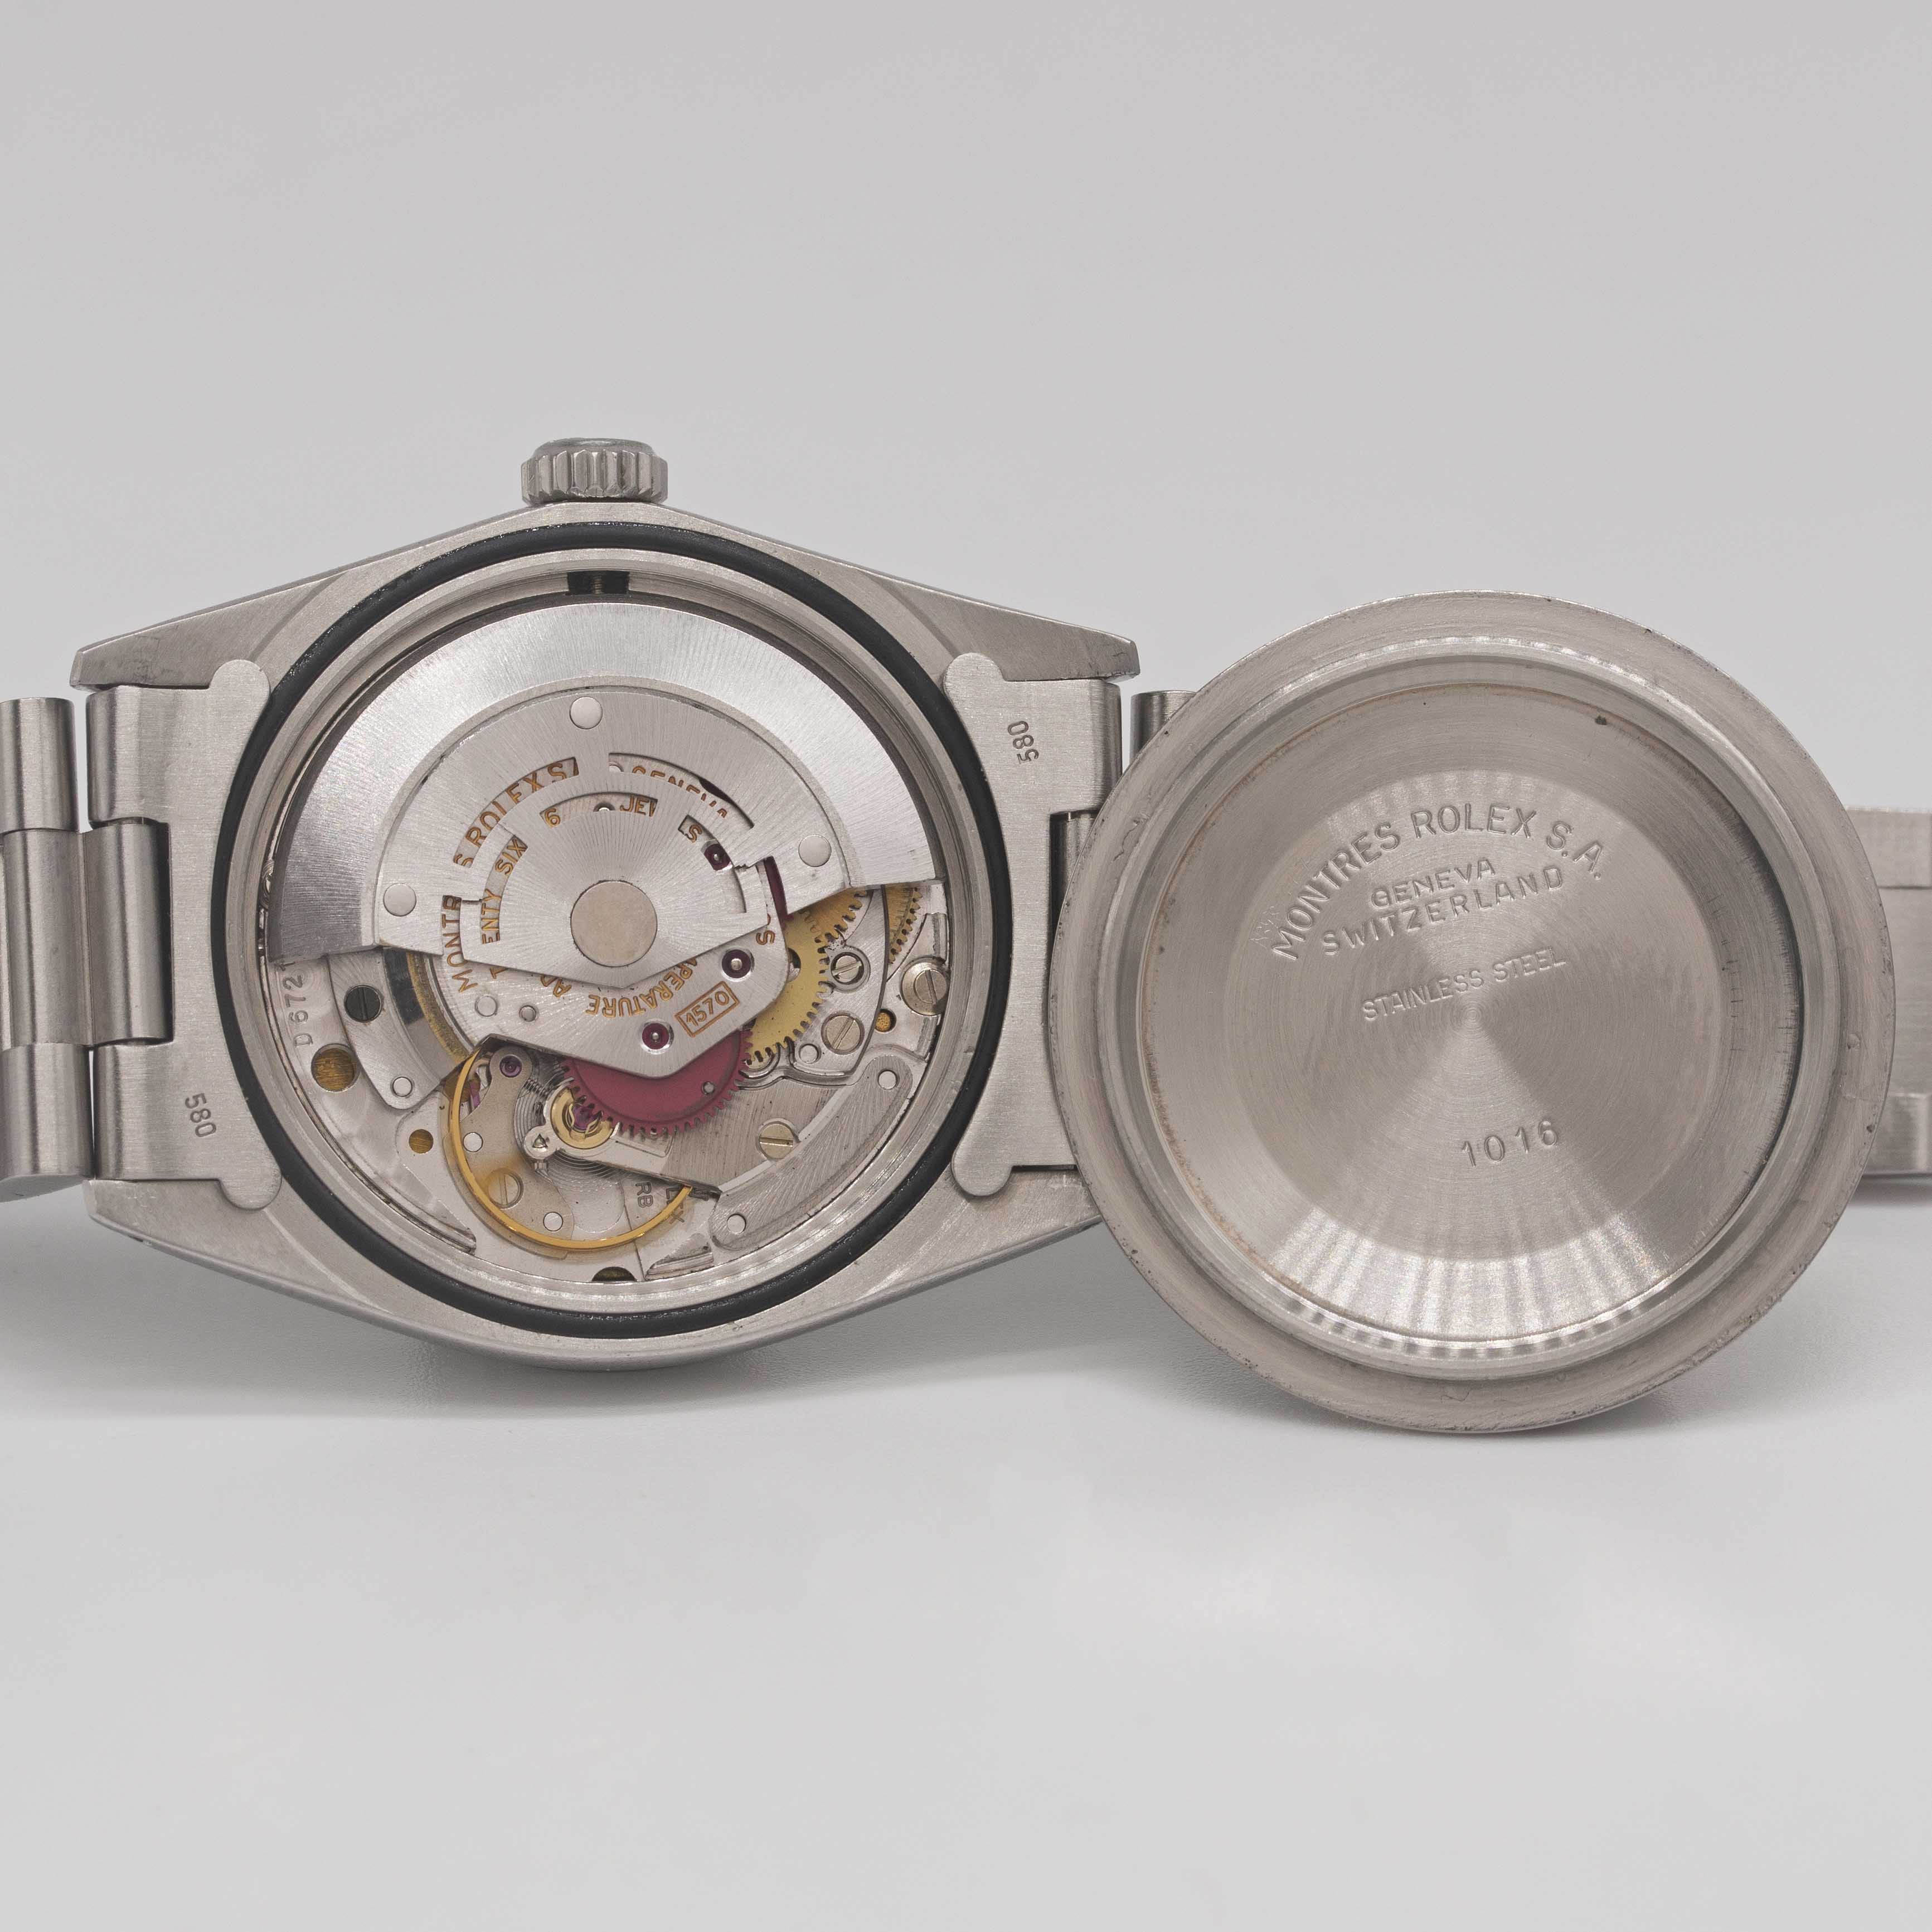 A GENTLEMAN'S STAINLESS STEEL ROLEX OYSTER PERPETUAL EXPLORER BRACELET WATCH CIRCA 1969, REF. 1016 - Image 9 of 11